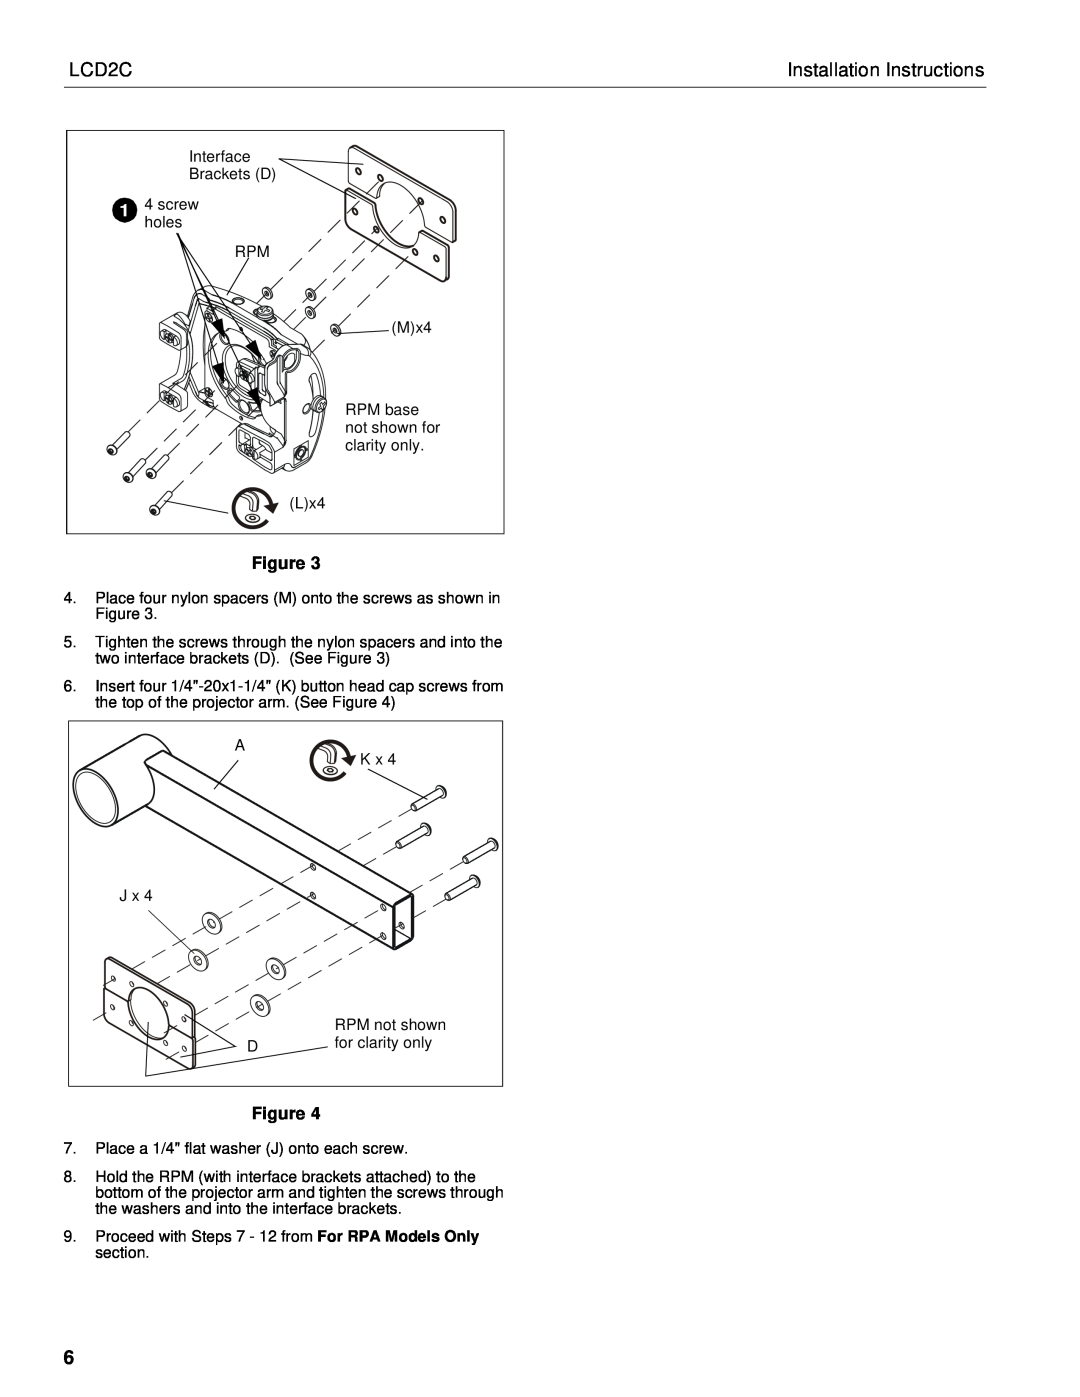 Chief Manufacturing LCD2C installation instructions Installation Instructions, Interface 